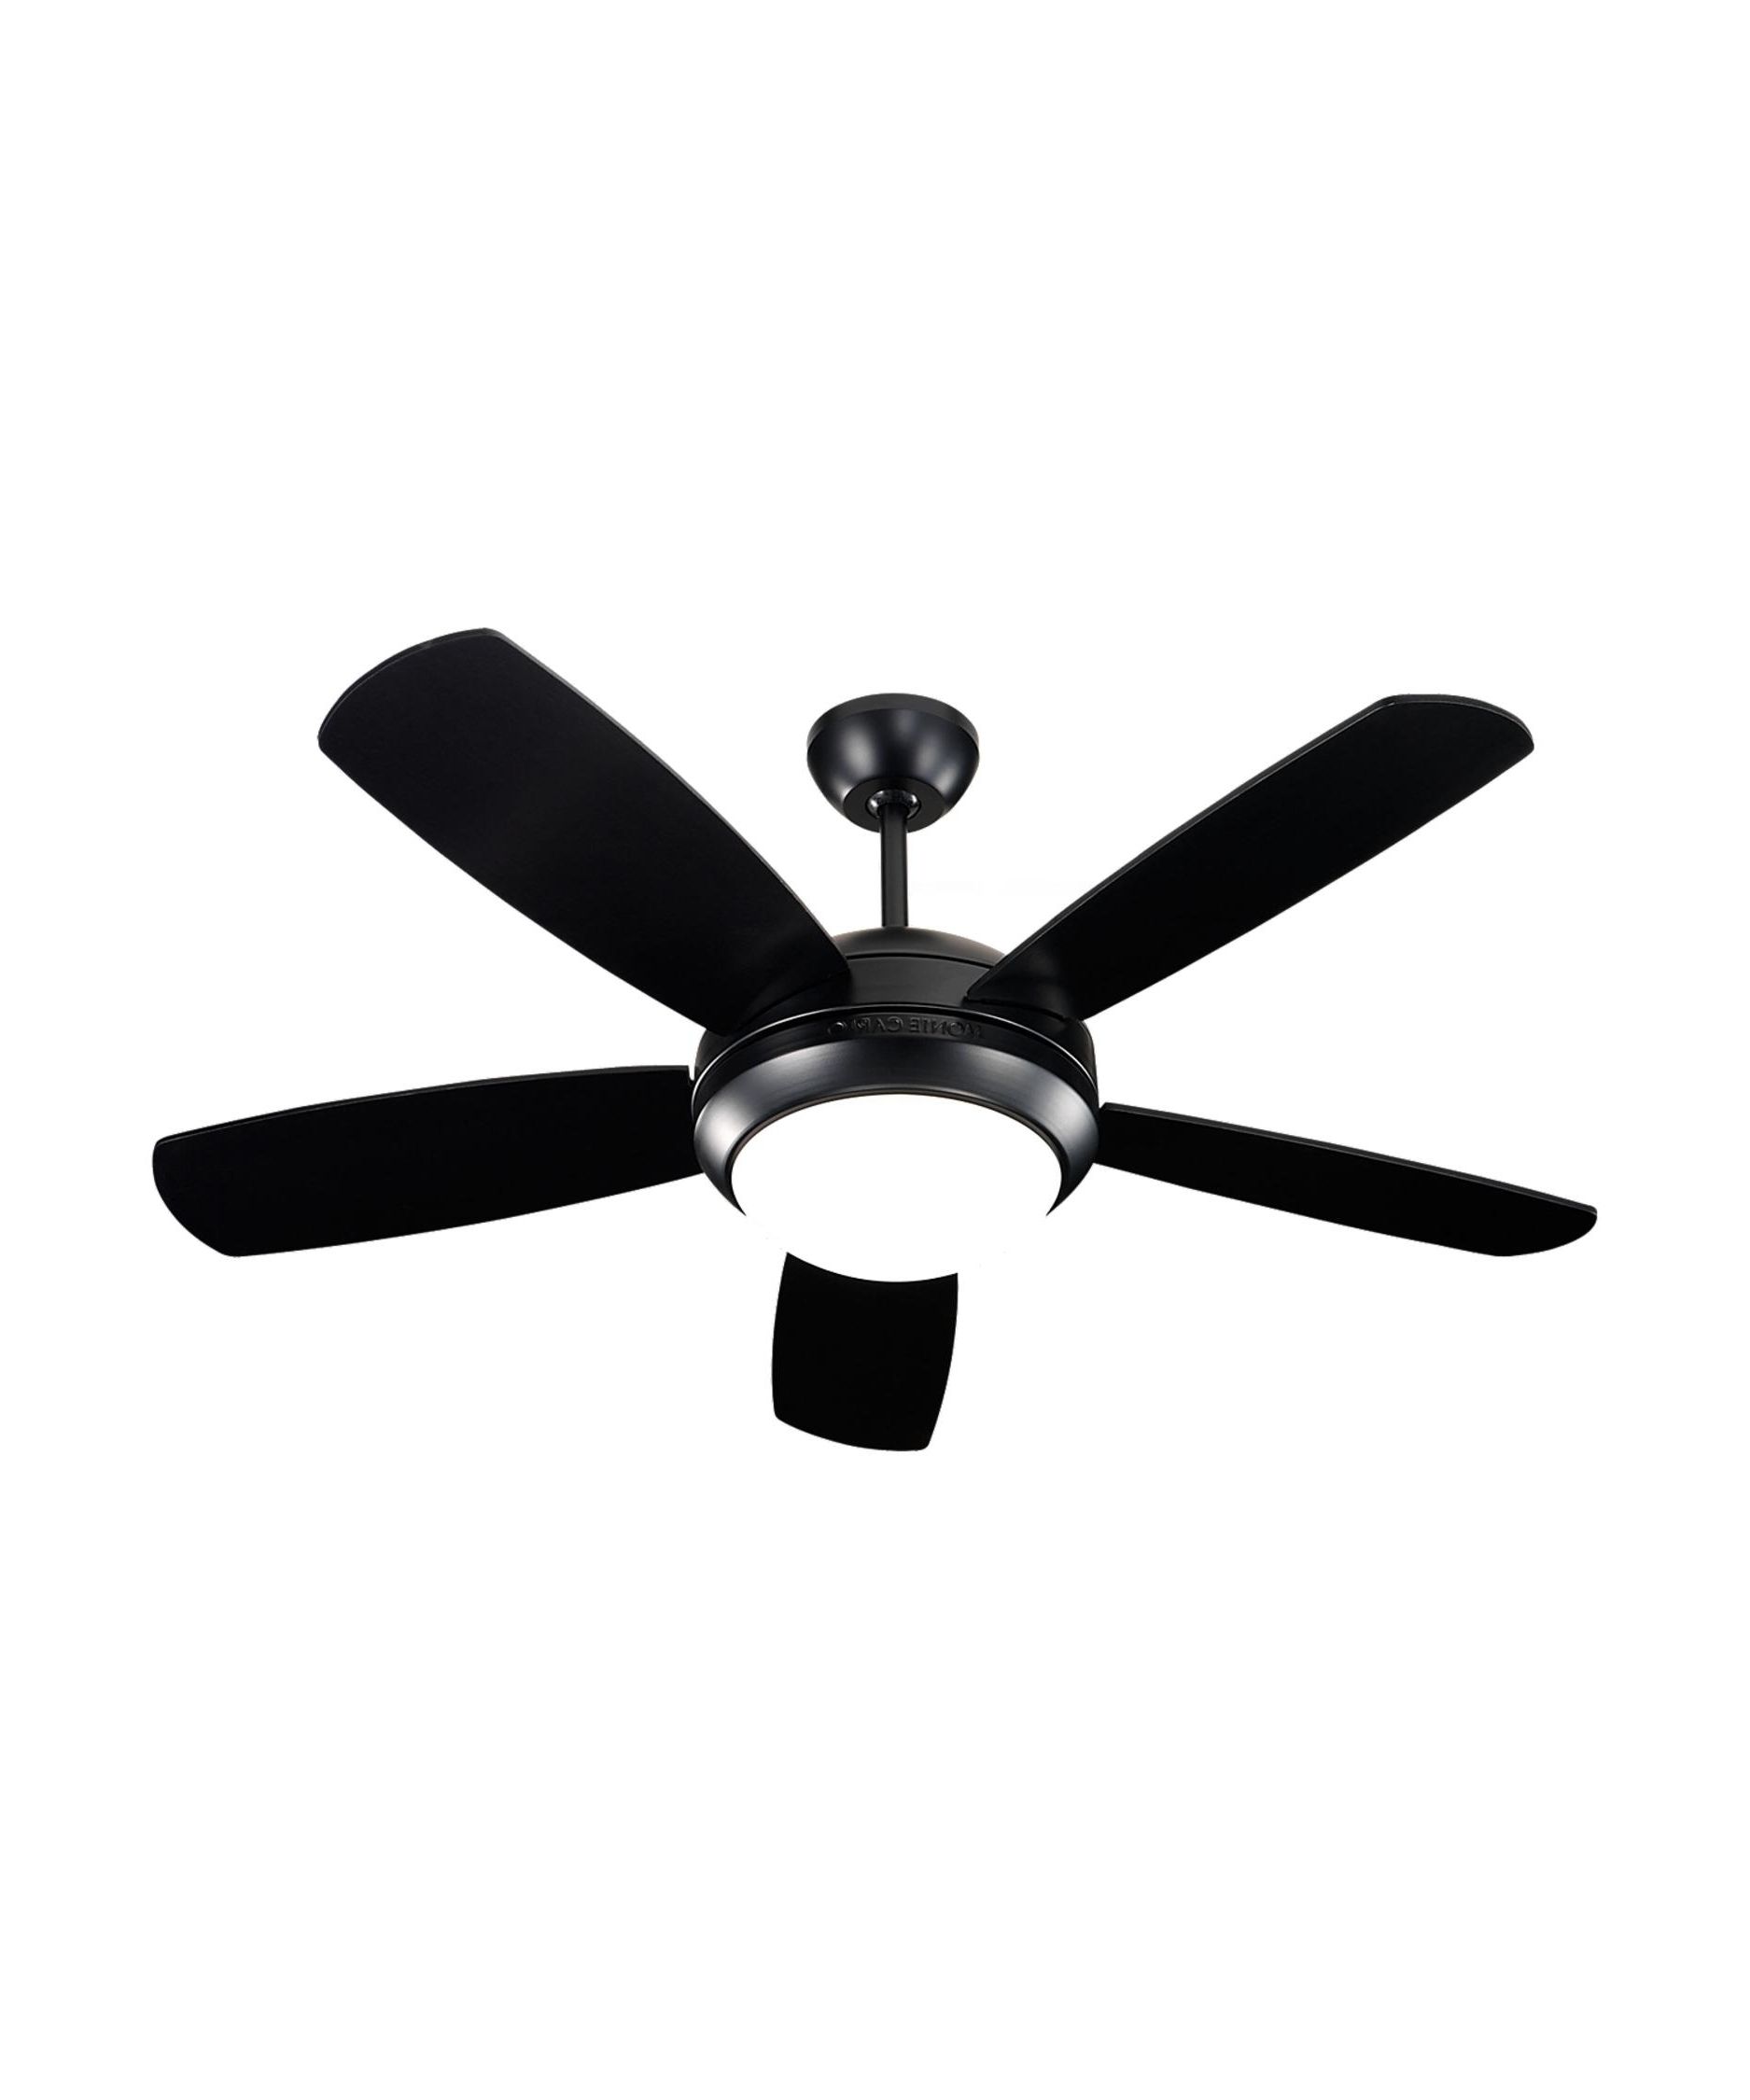 Current Black Outdoor Ceiling Fans With Light With Regard To Big Ho Black Outdoor Ceiling Fans With Lights 2018 Lowes Ceiling (View 15 of 20)